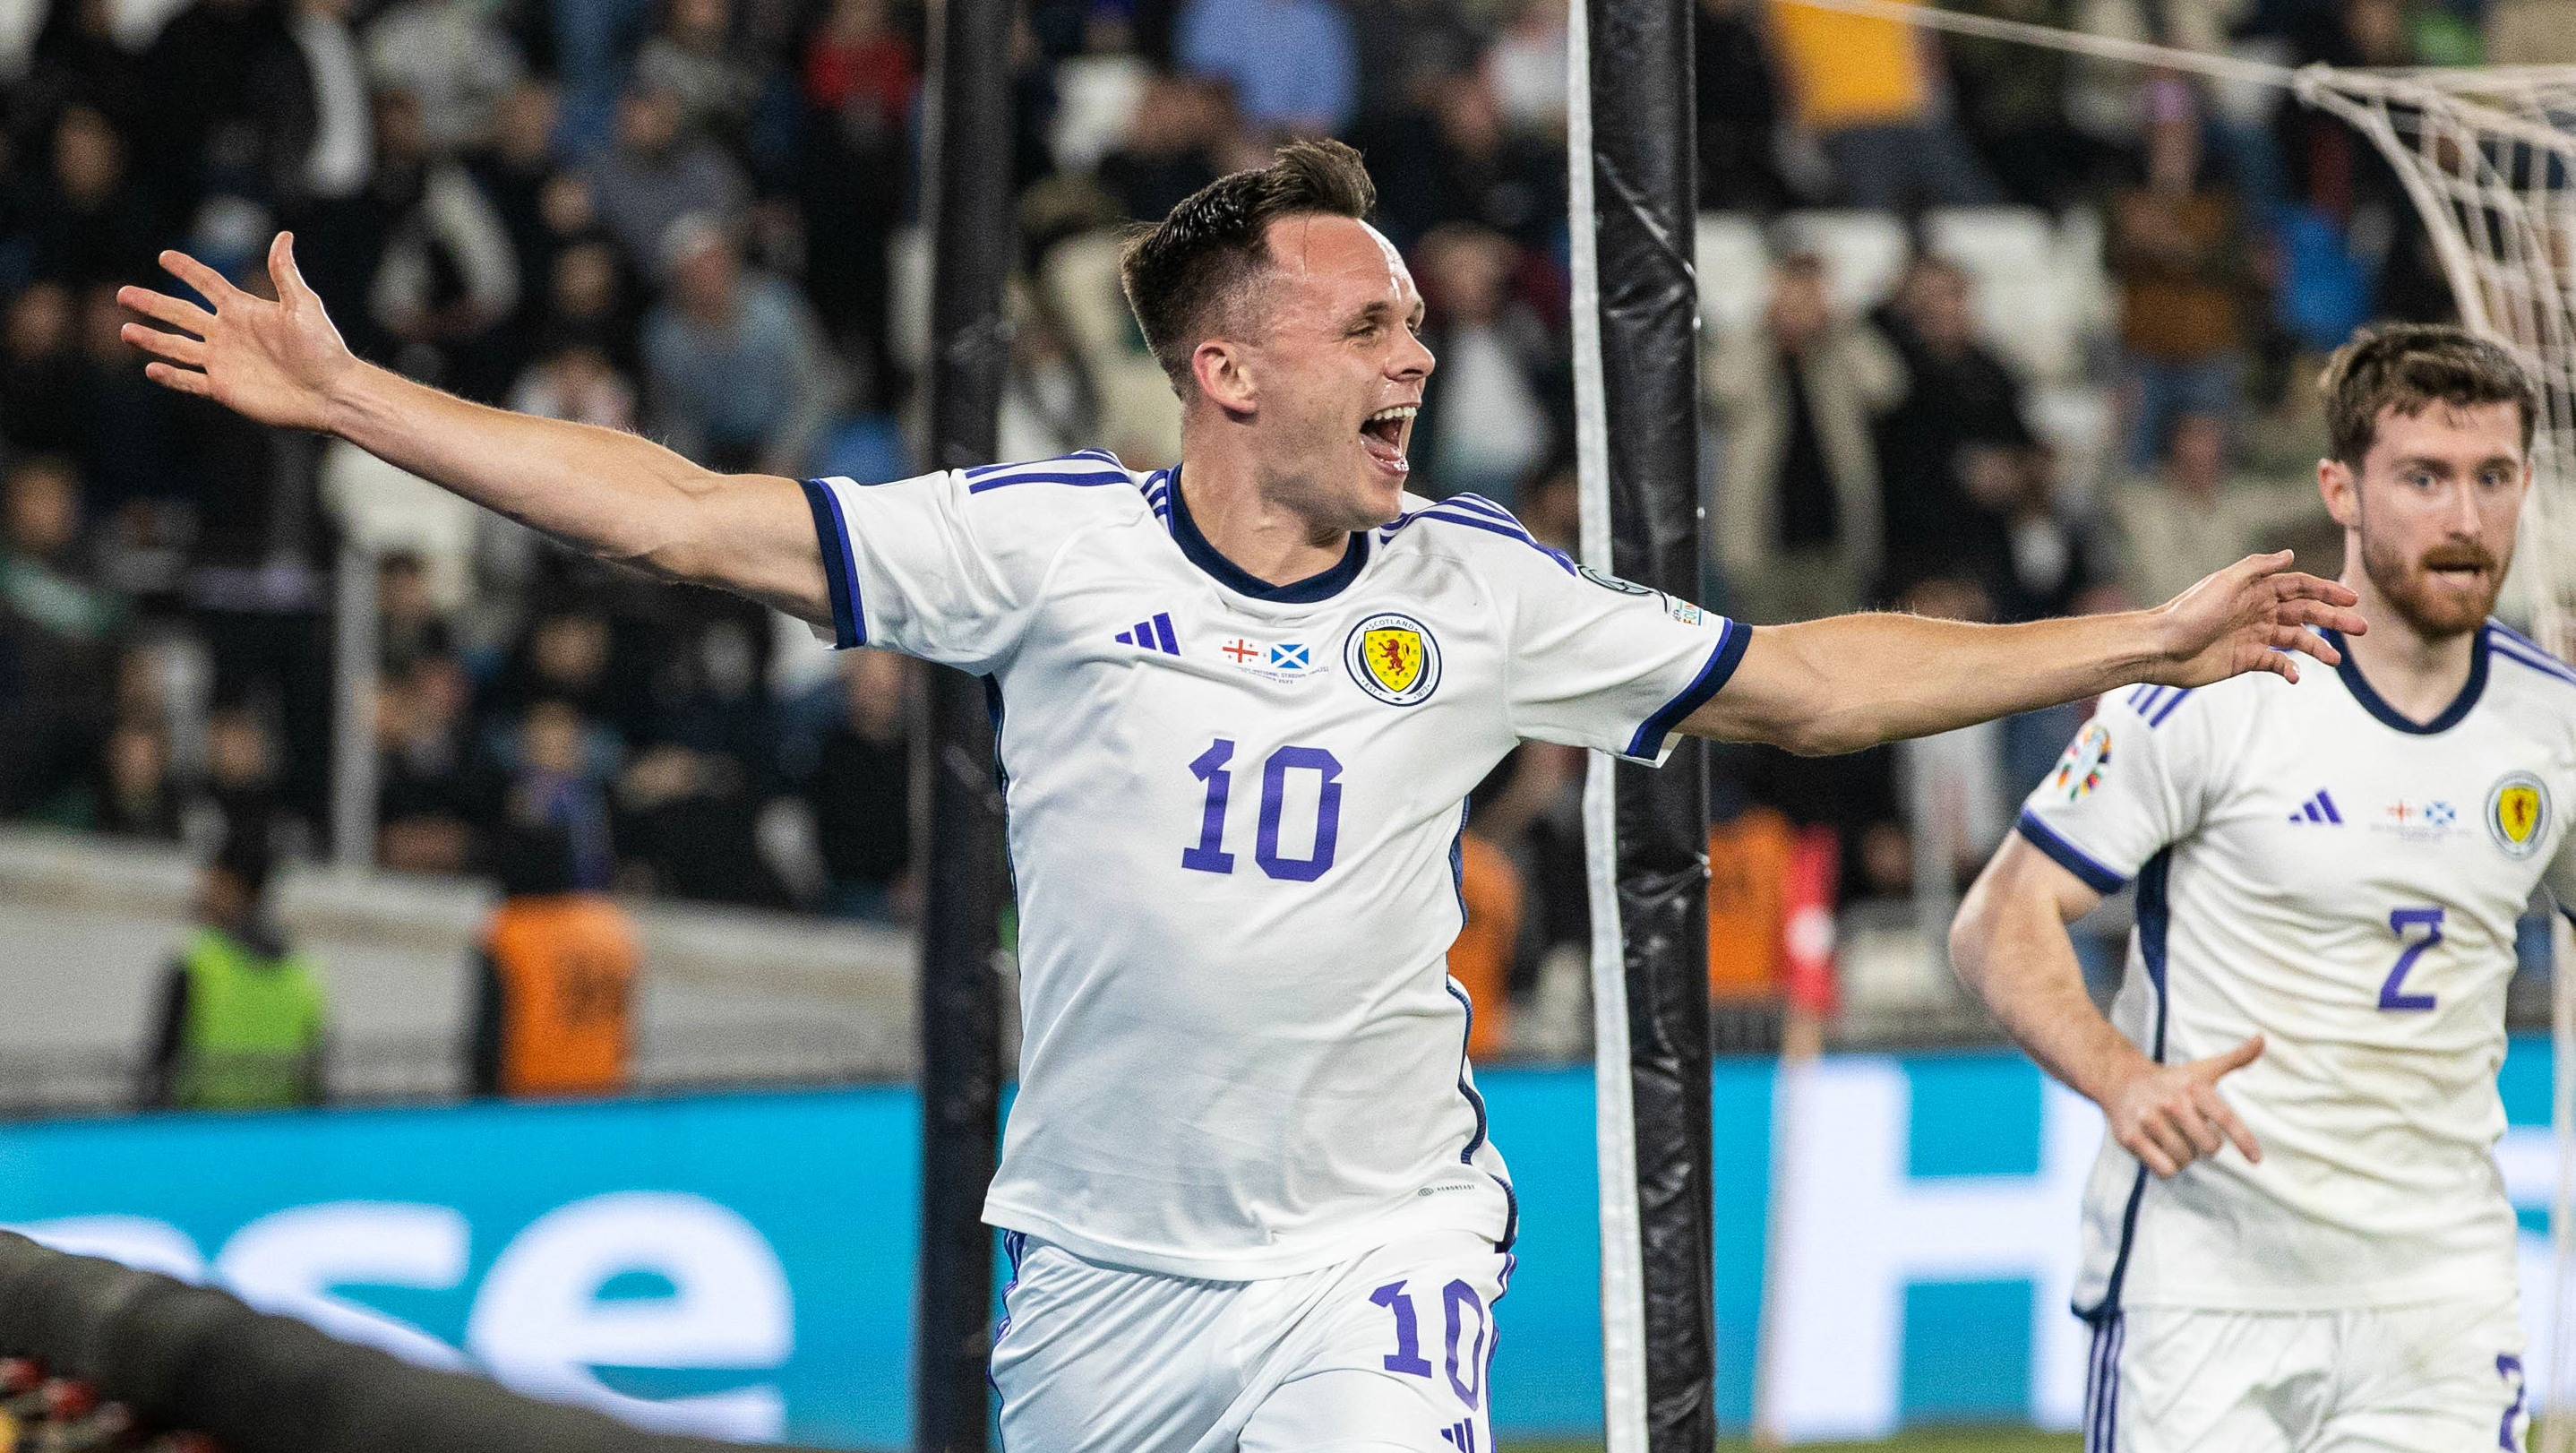 Lawrence Shankland could star for Scotland after enjoying a stellar season at Hearts. (Photo by Craig Williamson / SNS Group)